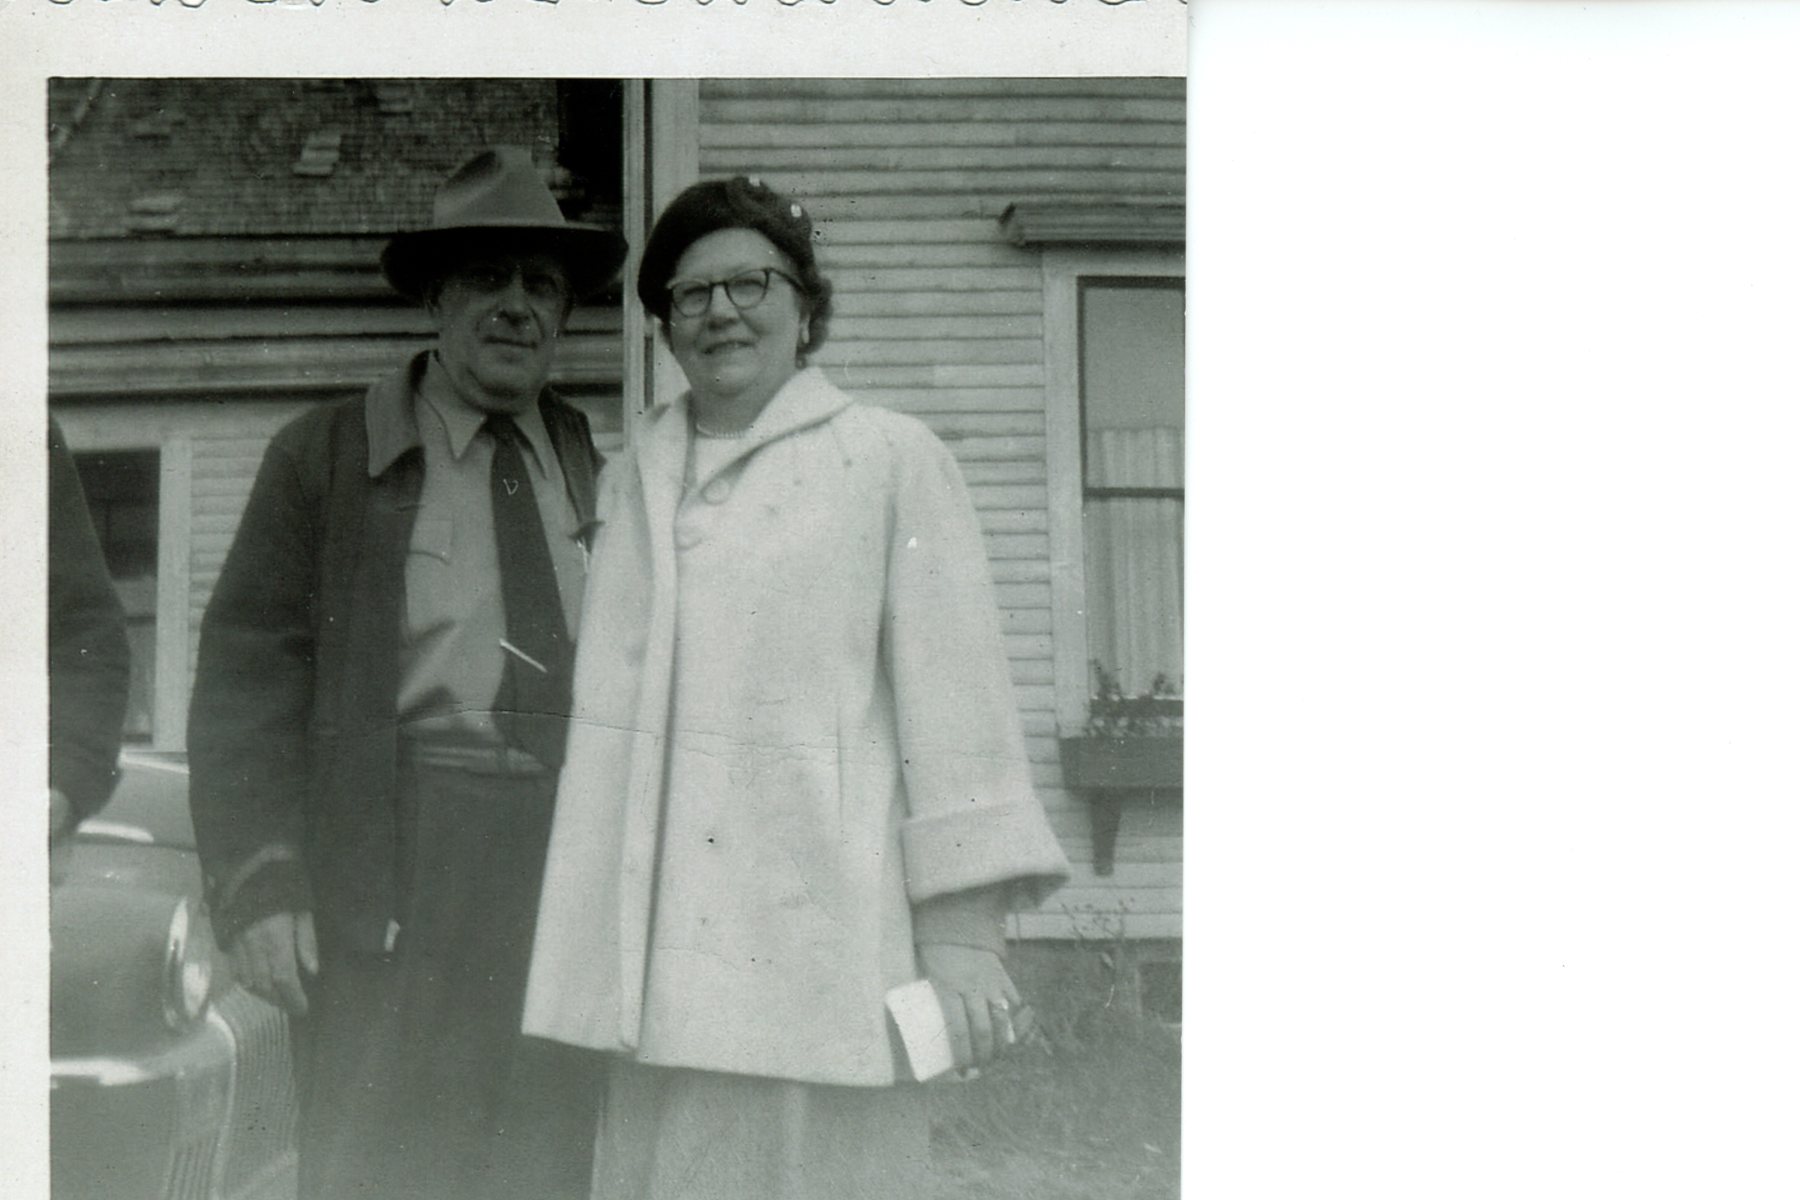 Willos Clark and Wife536